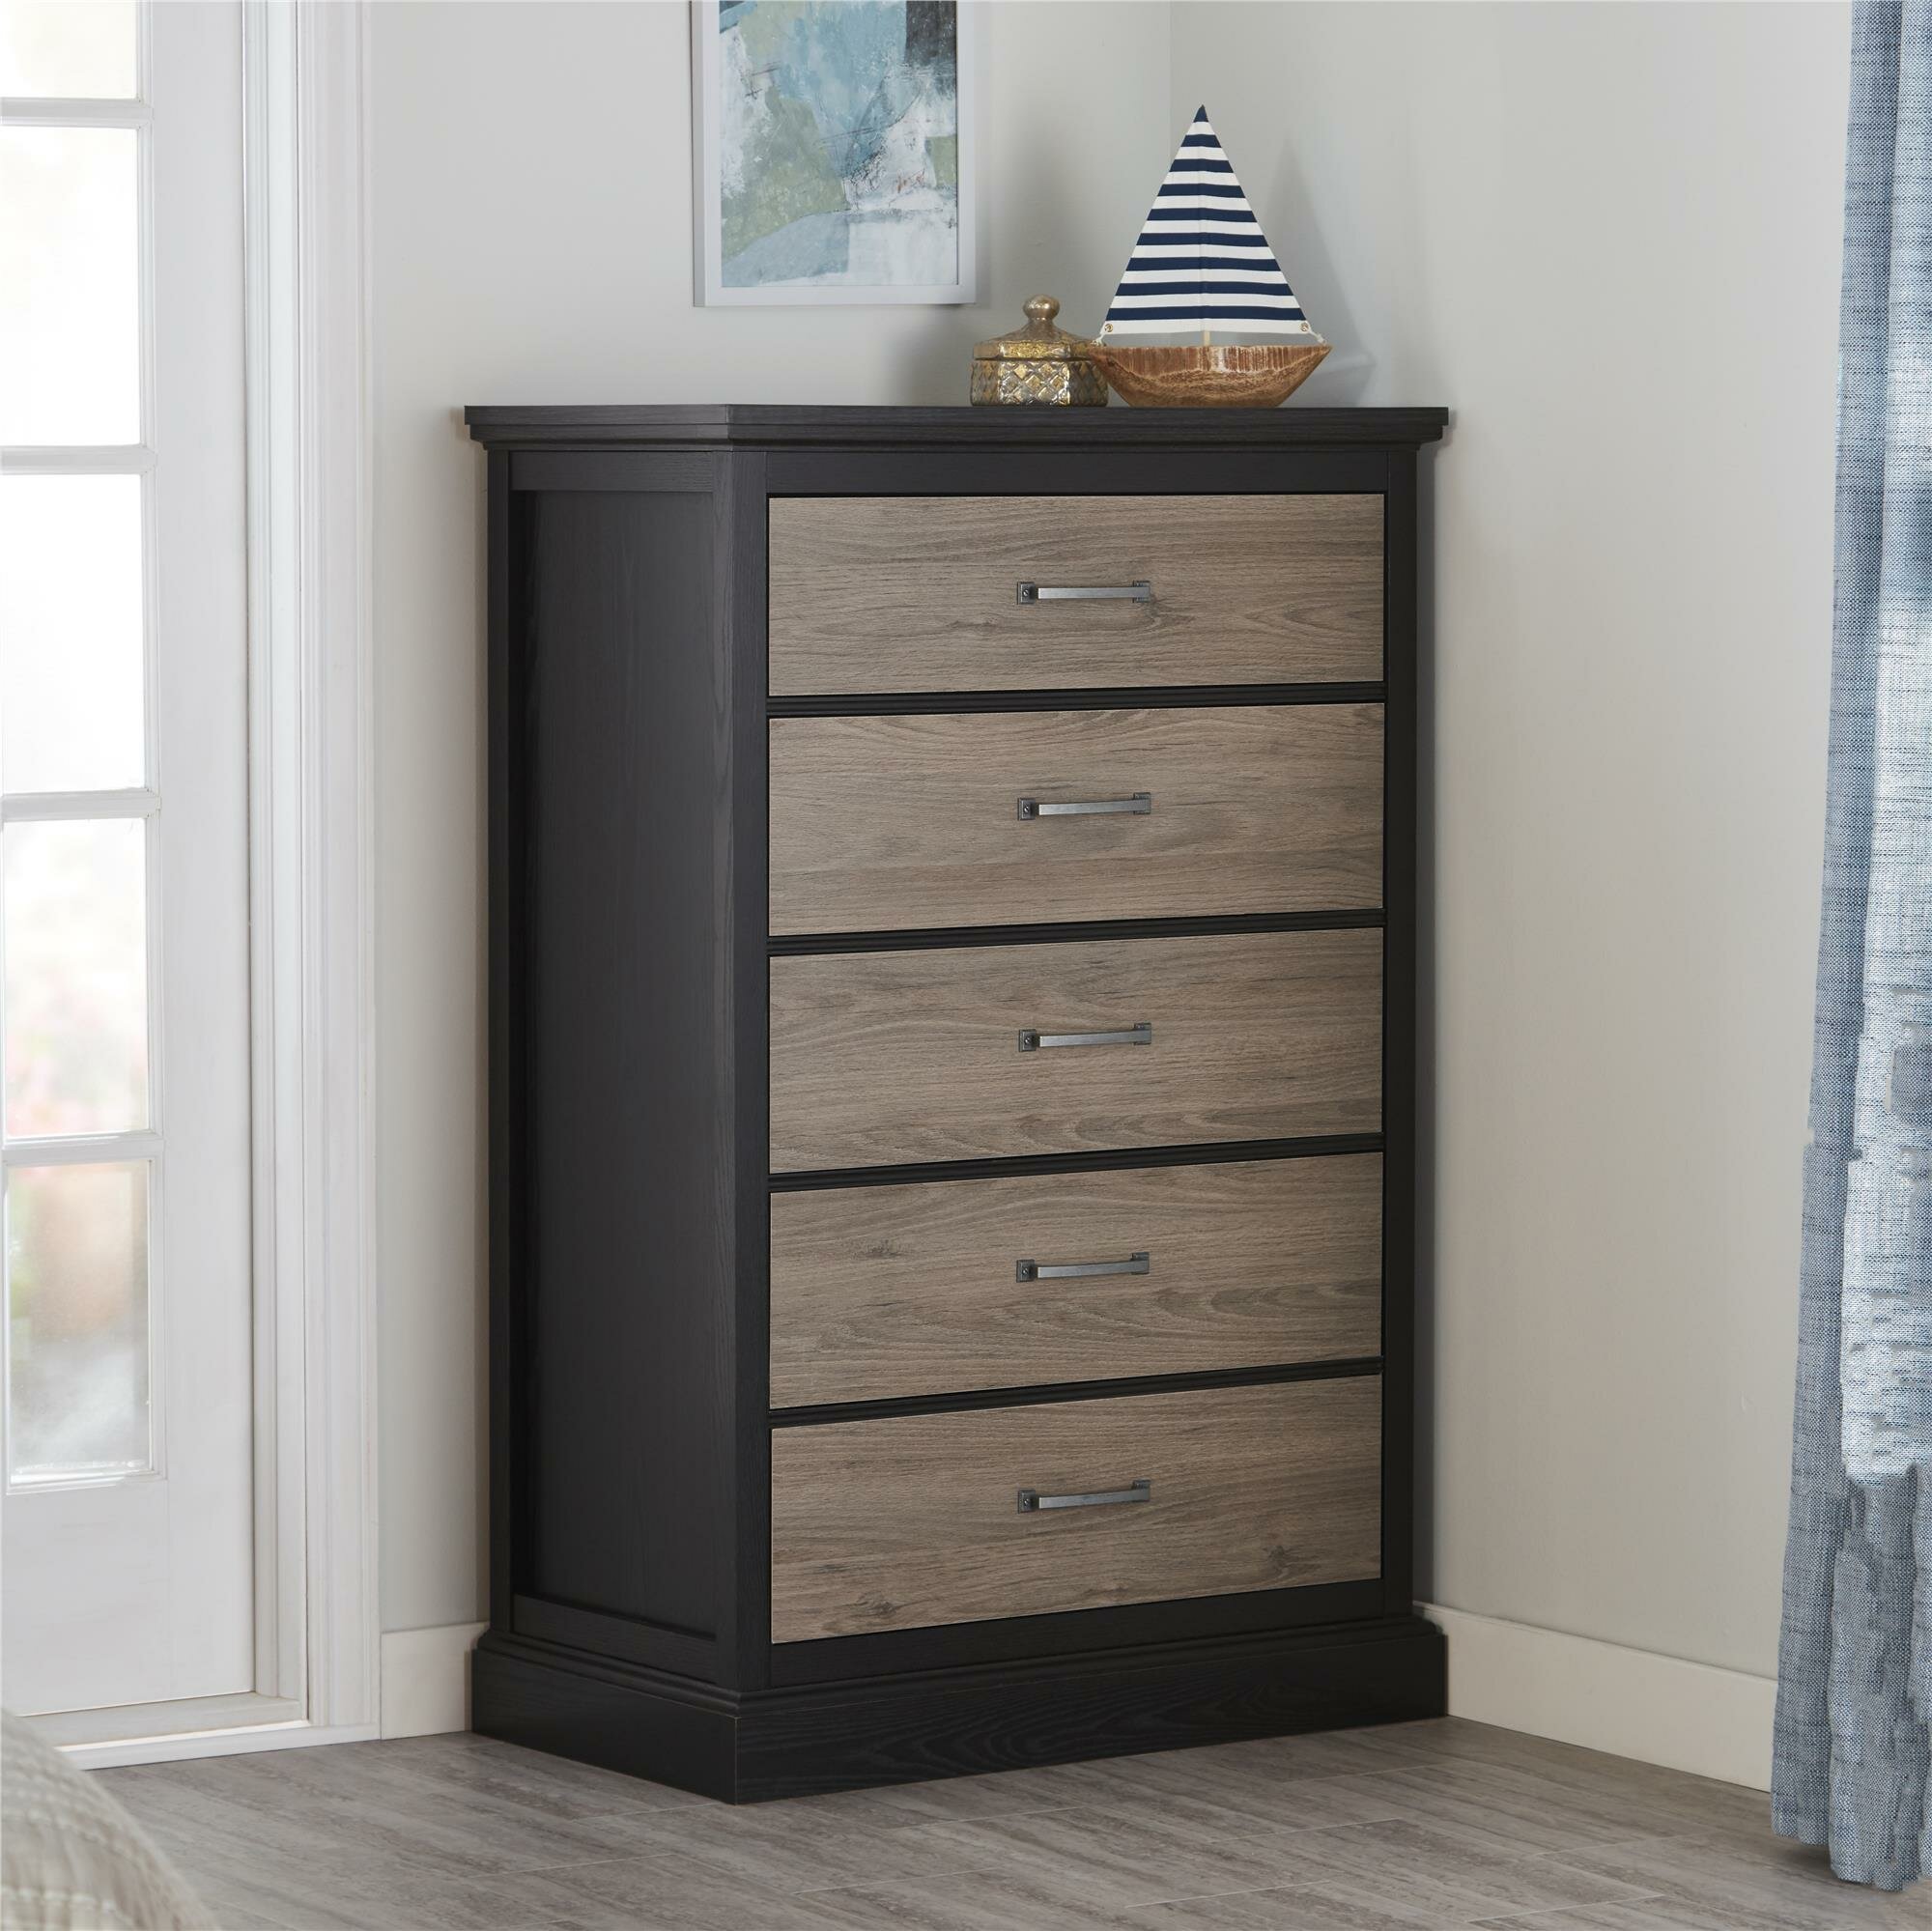 Andover Mills Fortuna 5 Drawer Accent Chest Reviews Wayfair